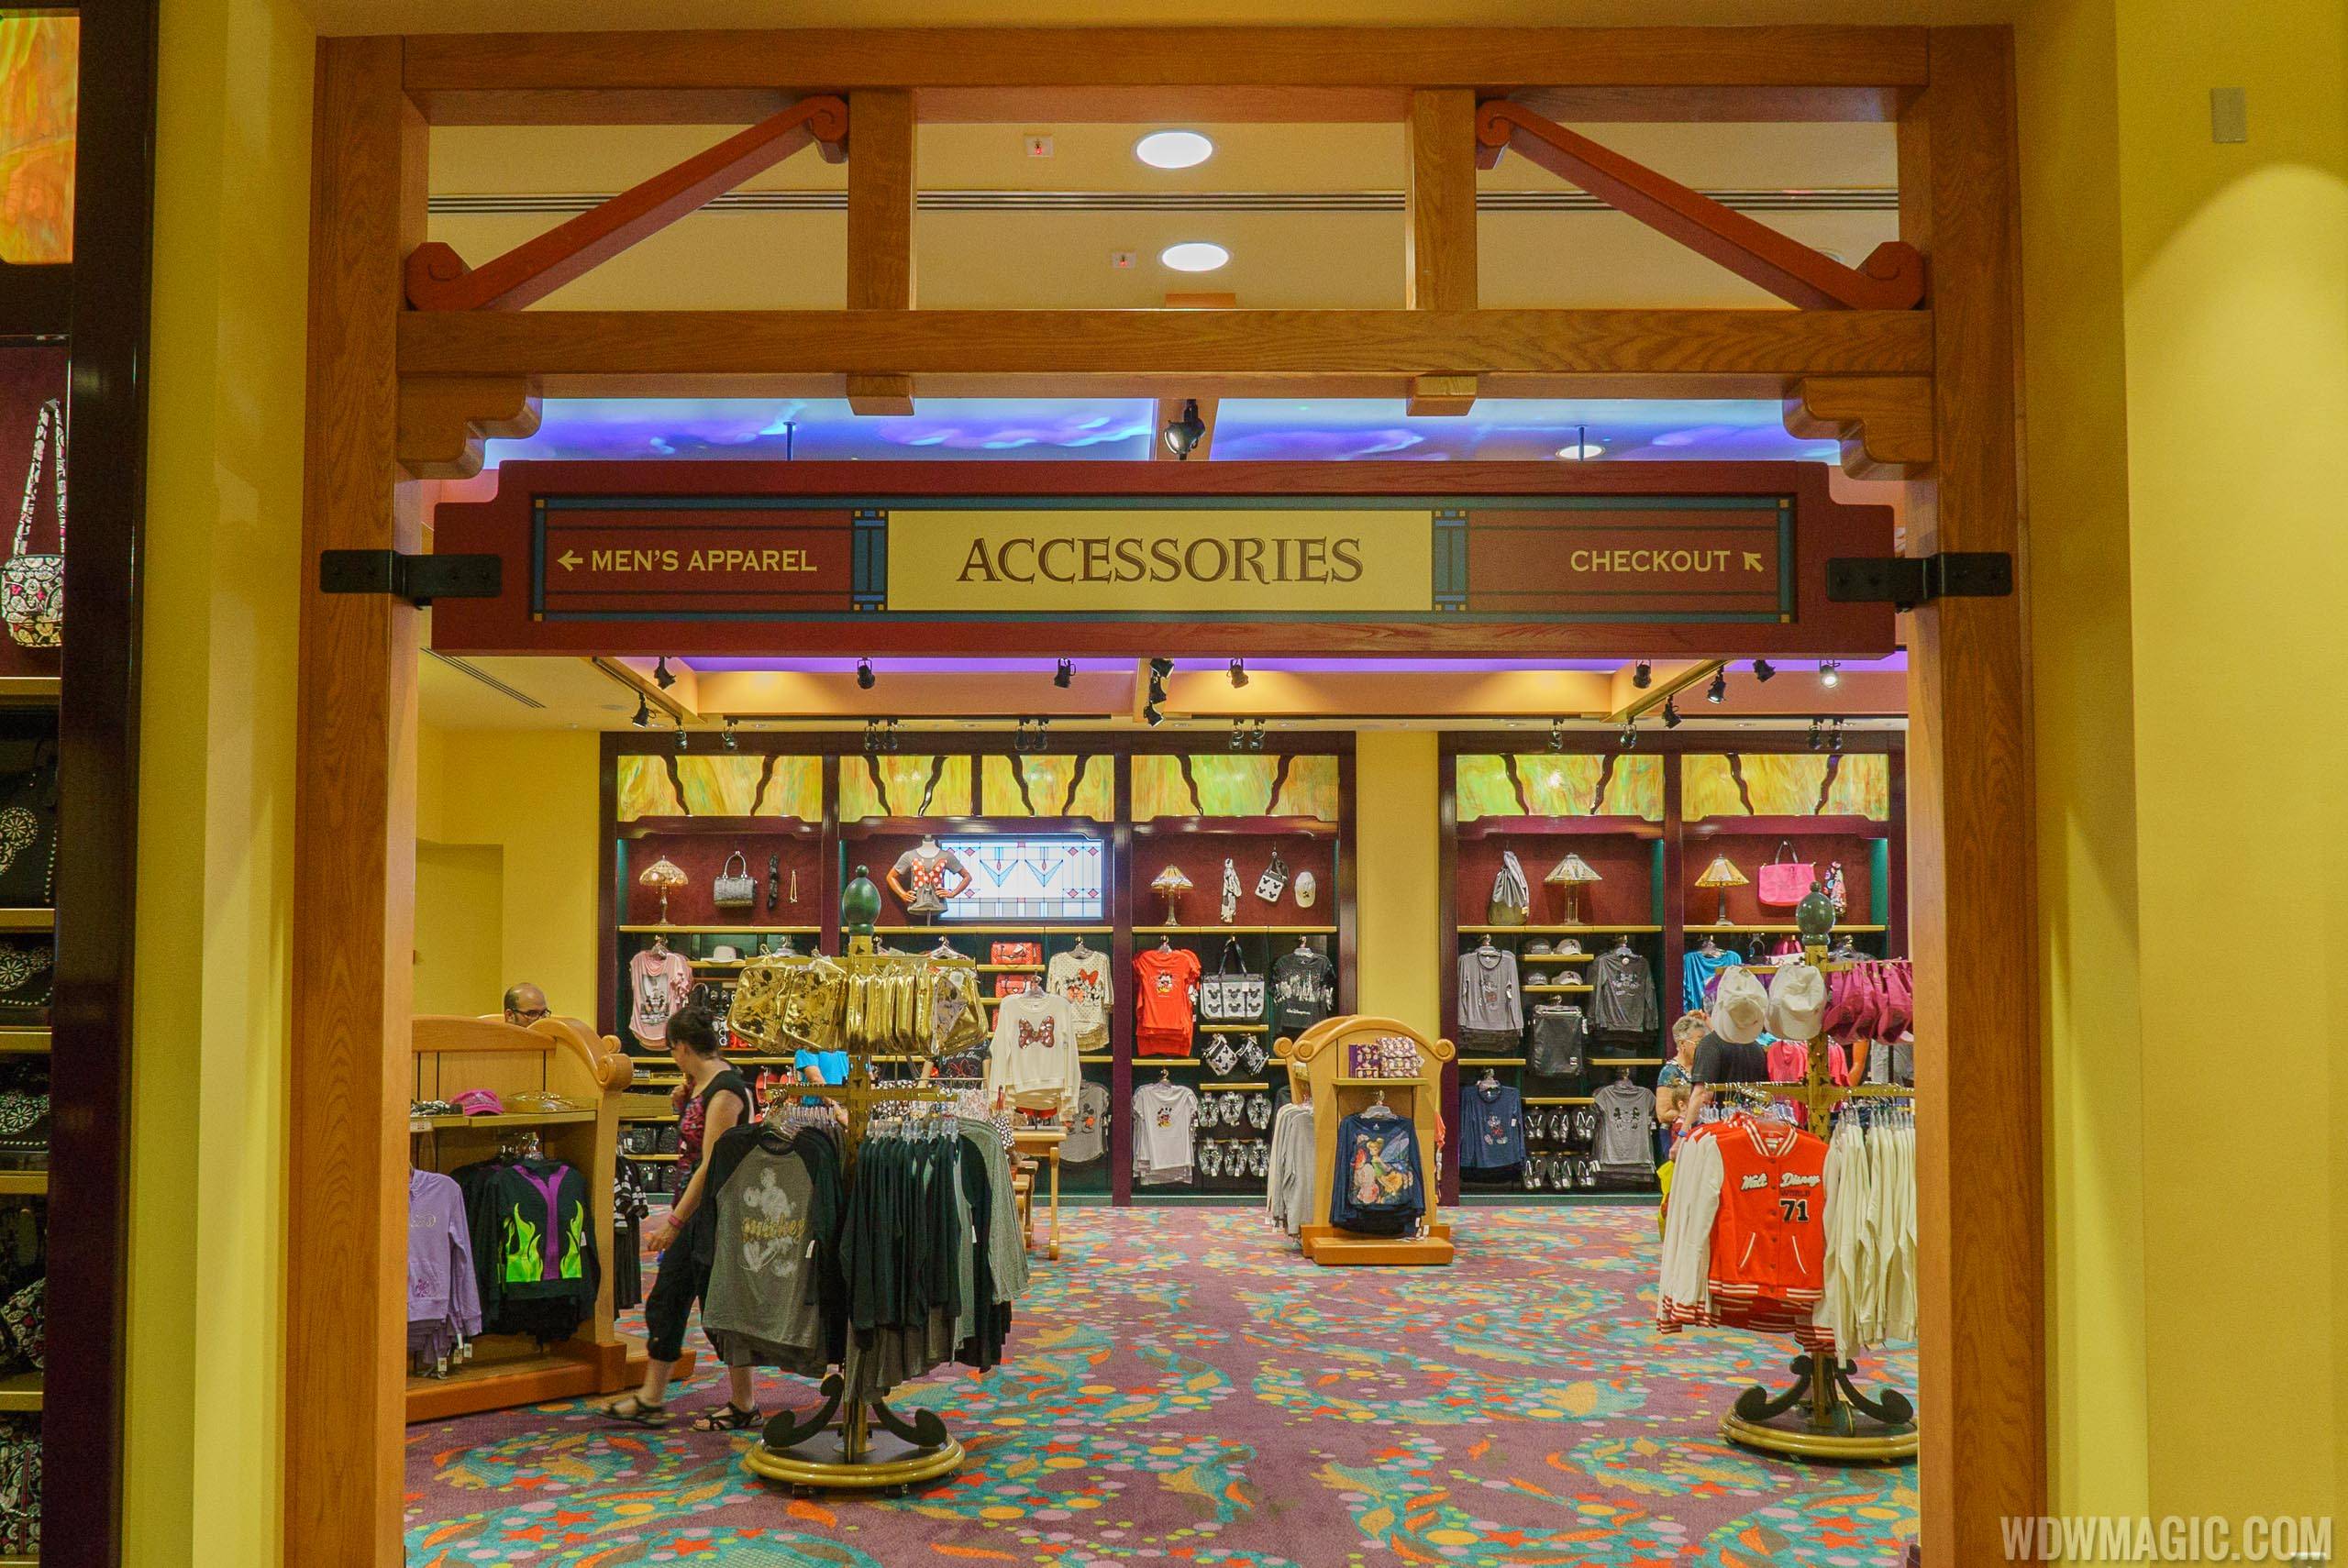 World of Disney expansion - Entrance from existing store